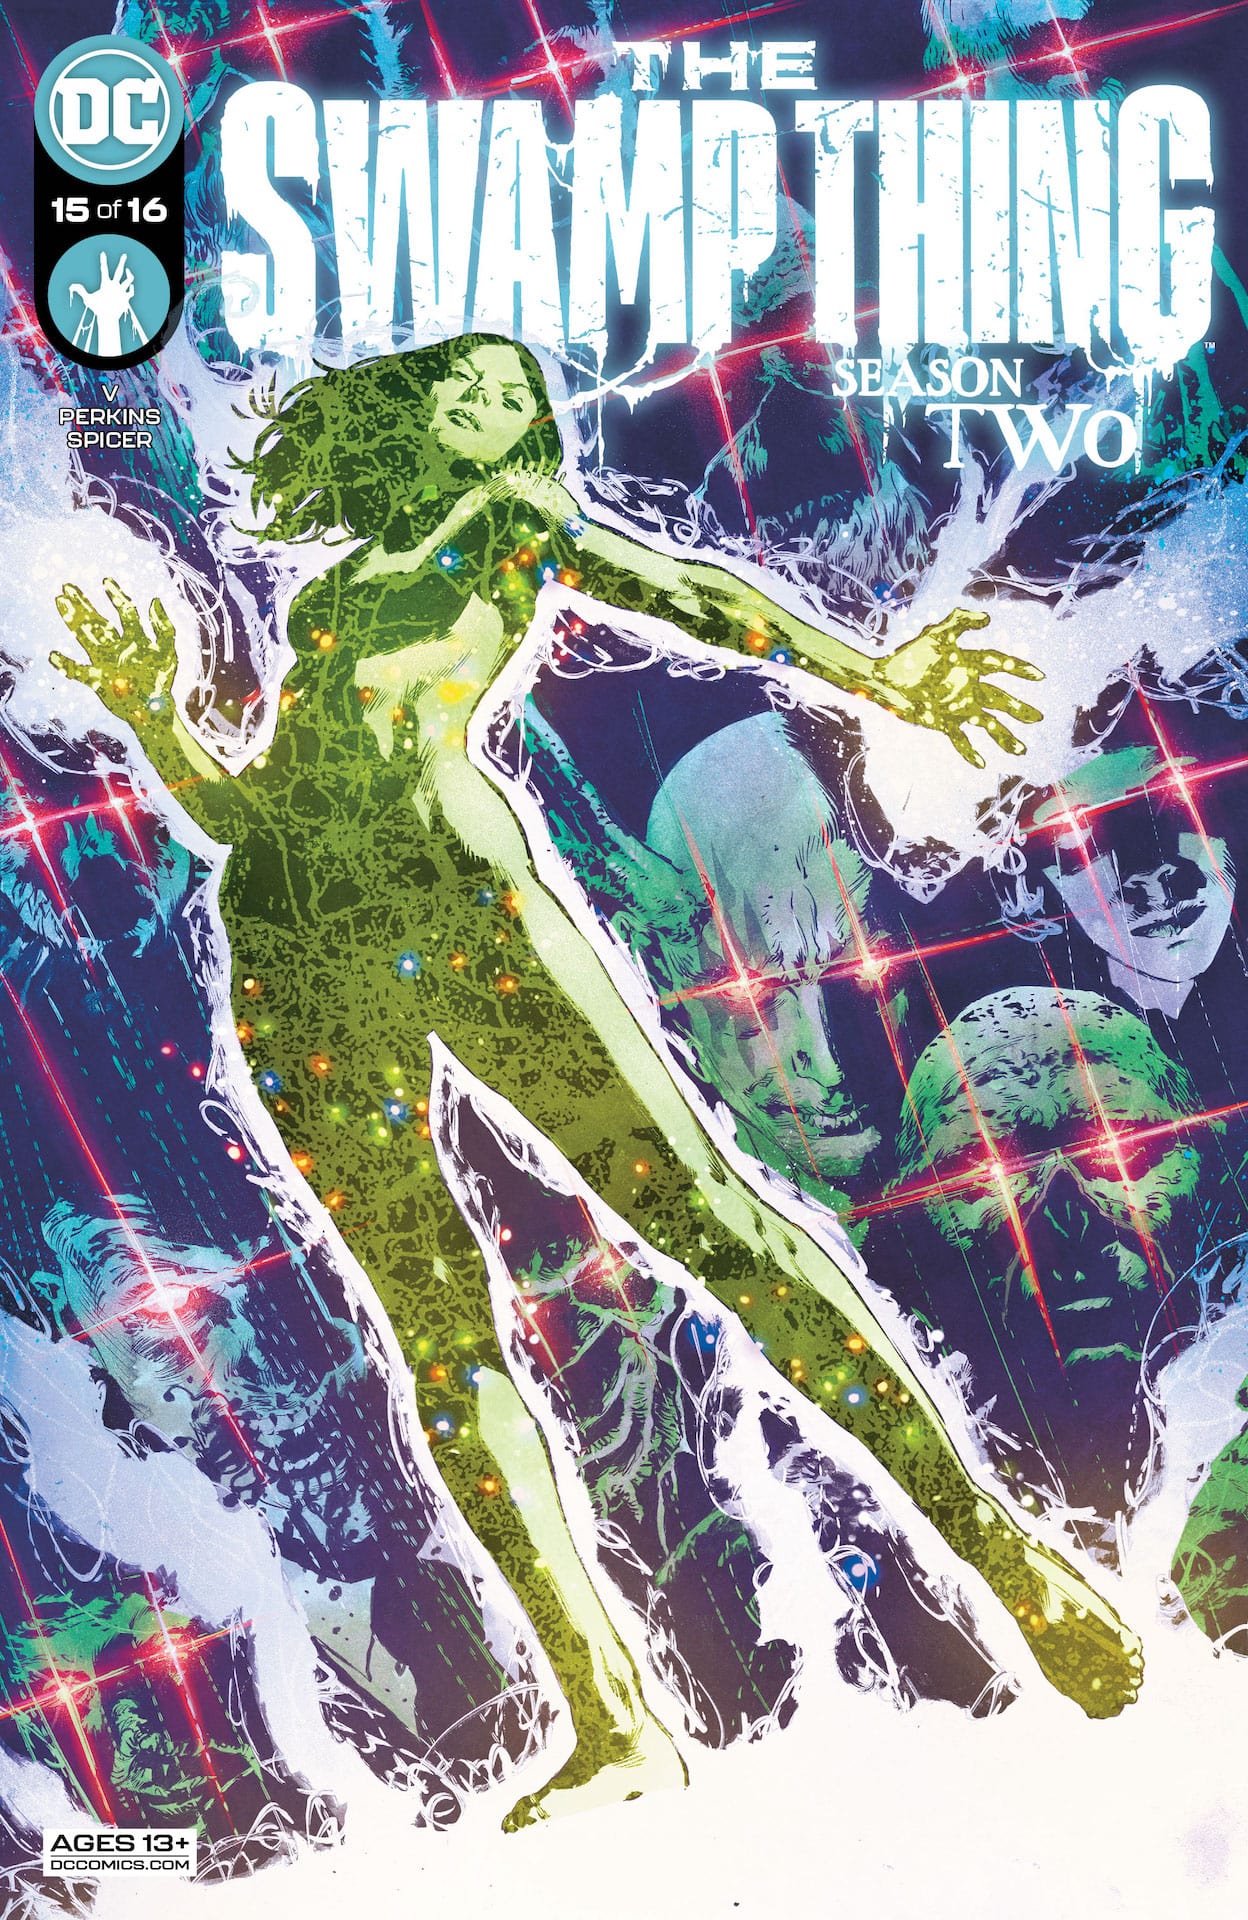 DC Preview: The Swamp Thing #15